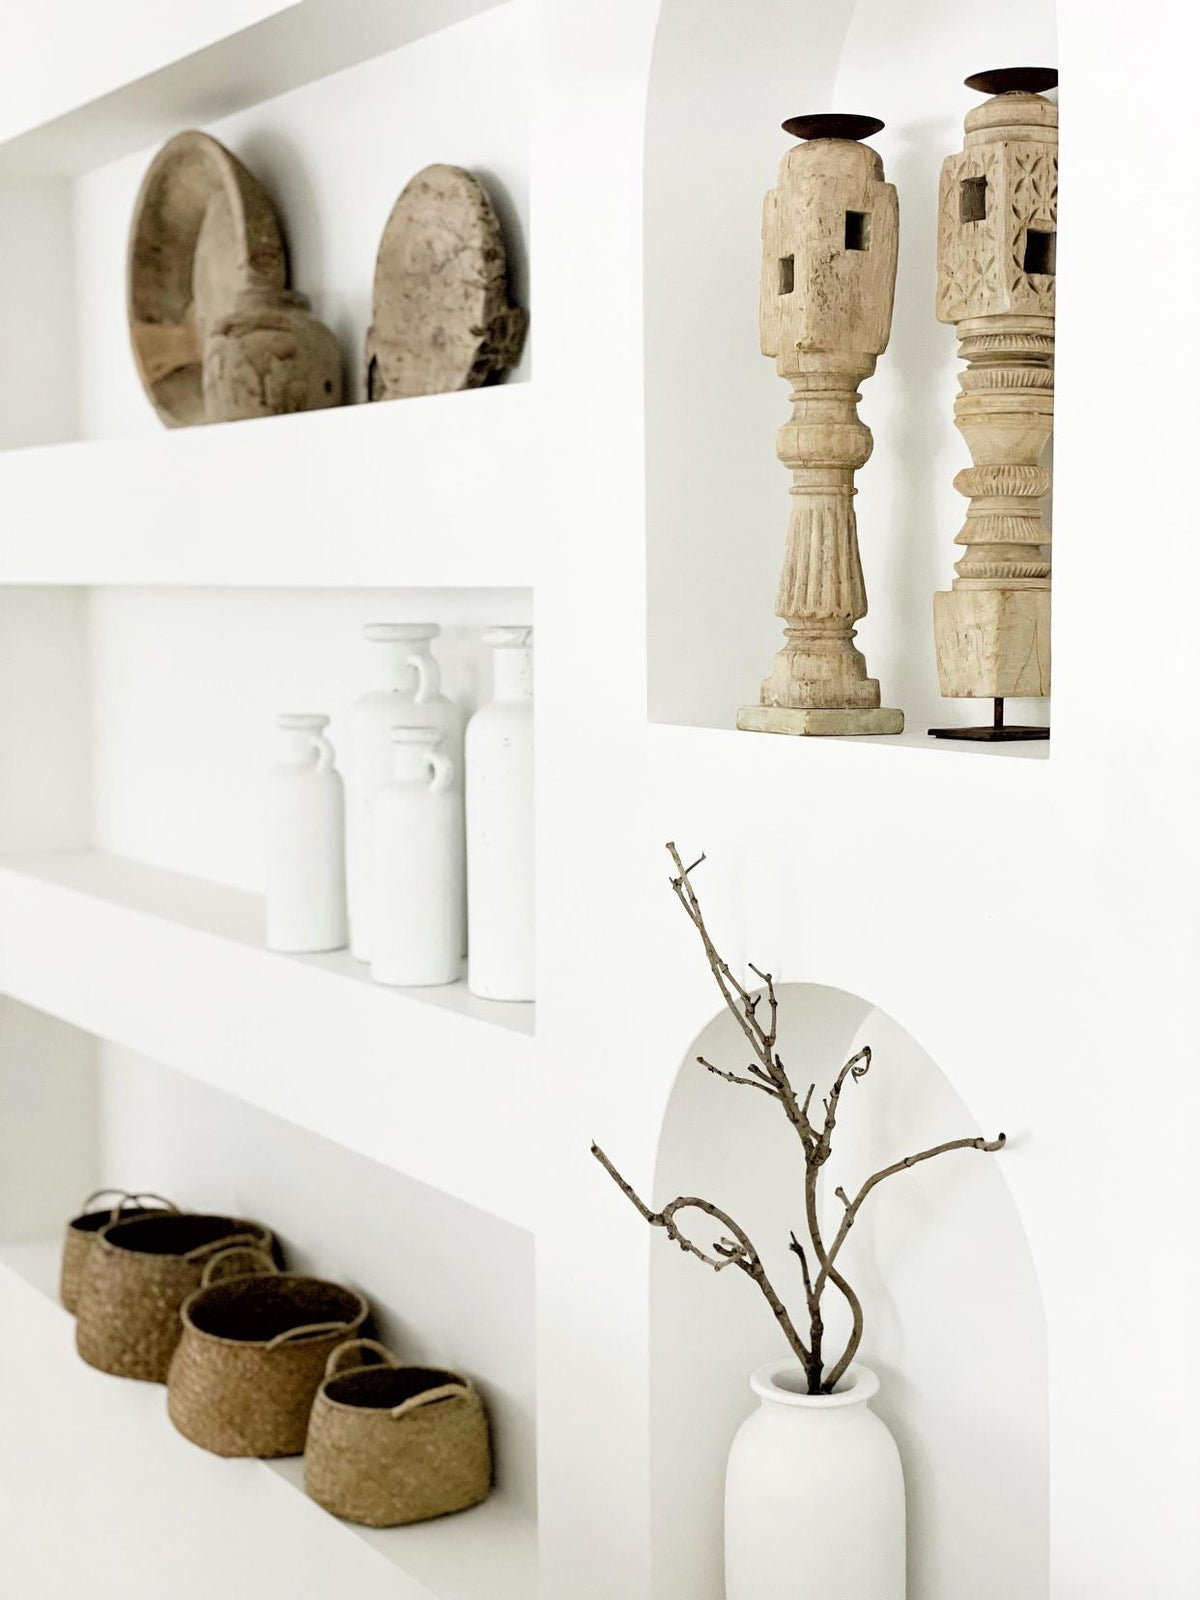 These vintage Candle pillars are made from old Indian furniture pieces & have been repurposed into bespoke candle stands adding character and culture to your home. They have a beautiful raw earthiness to them and